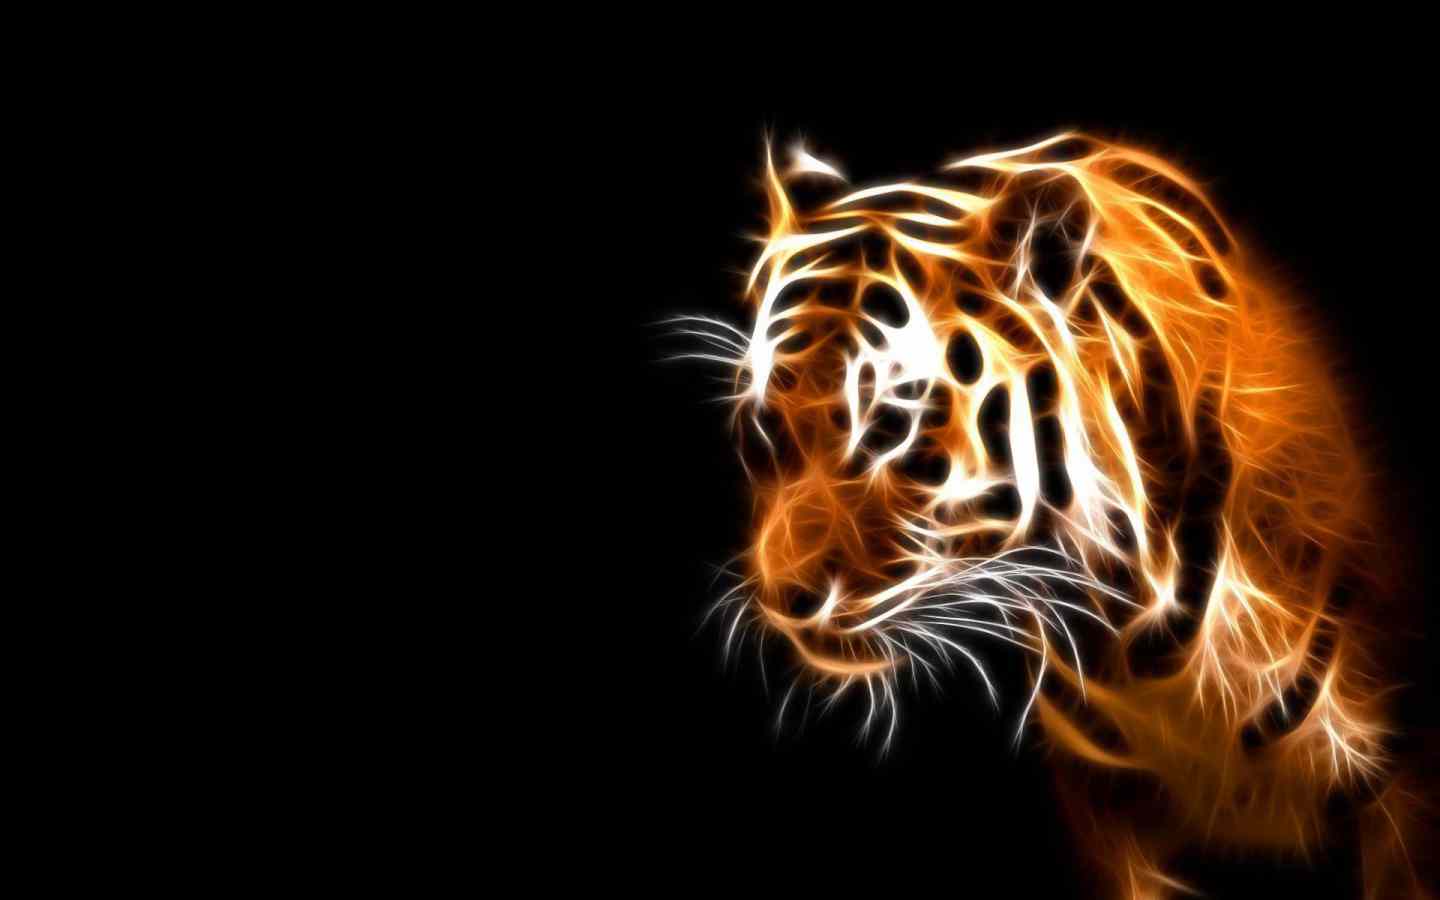 Free Images Of Tigers Download